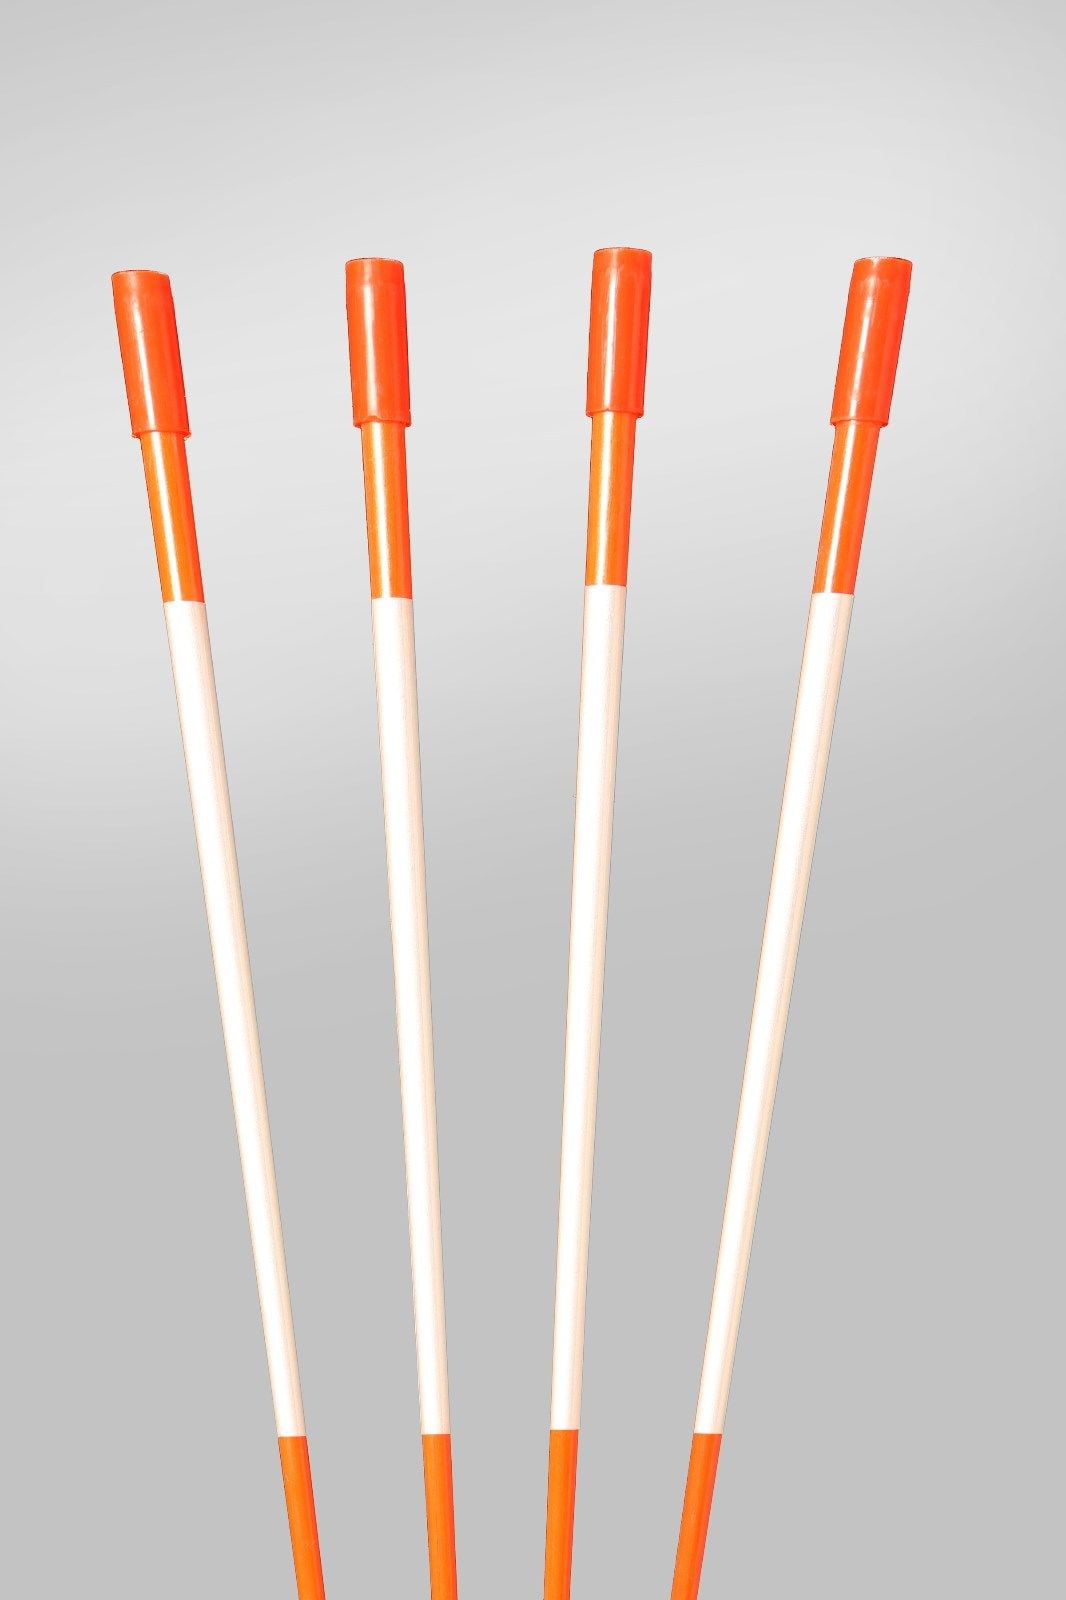 5/16 Thick X 48 Orange Fiberglass Stakes Snow Stakes Driveway Marker 50 Pack Plow Stakes 